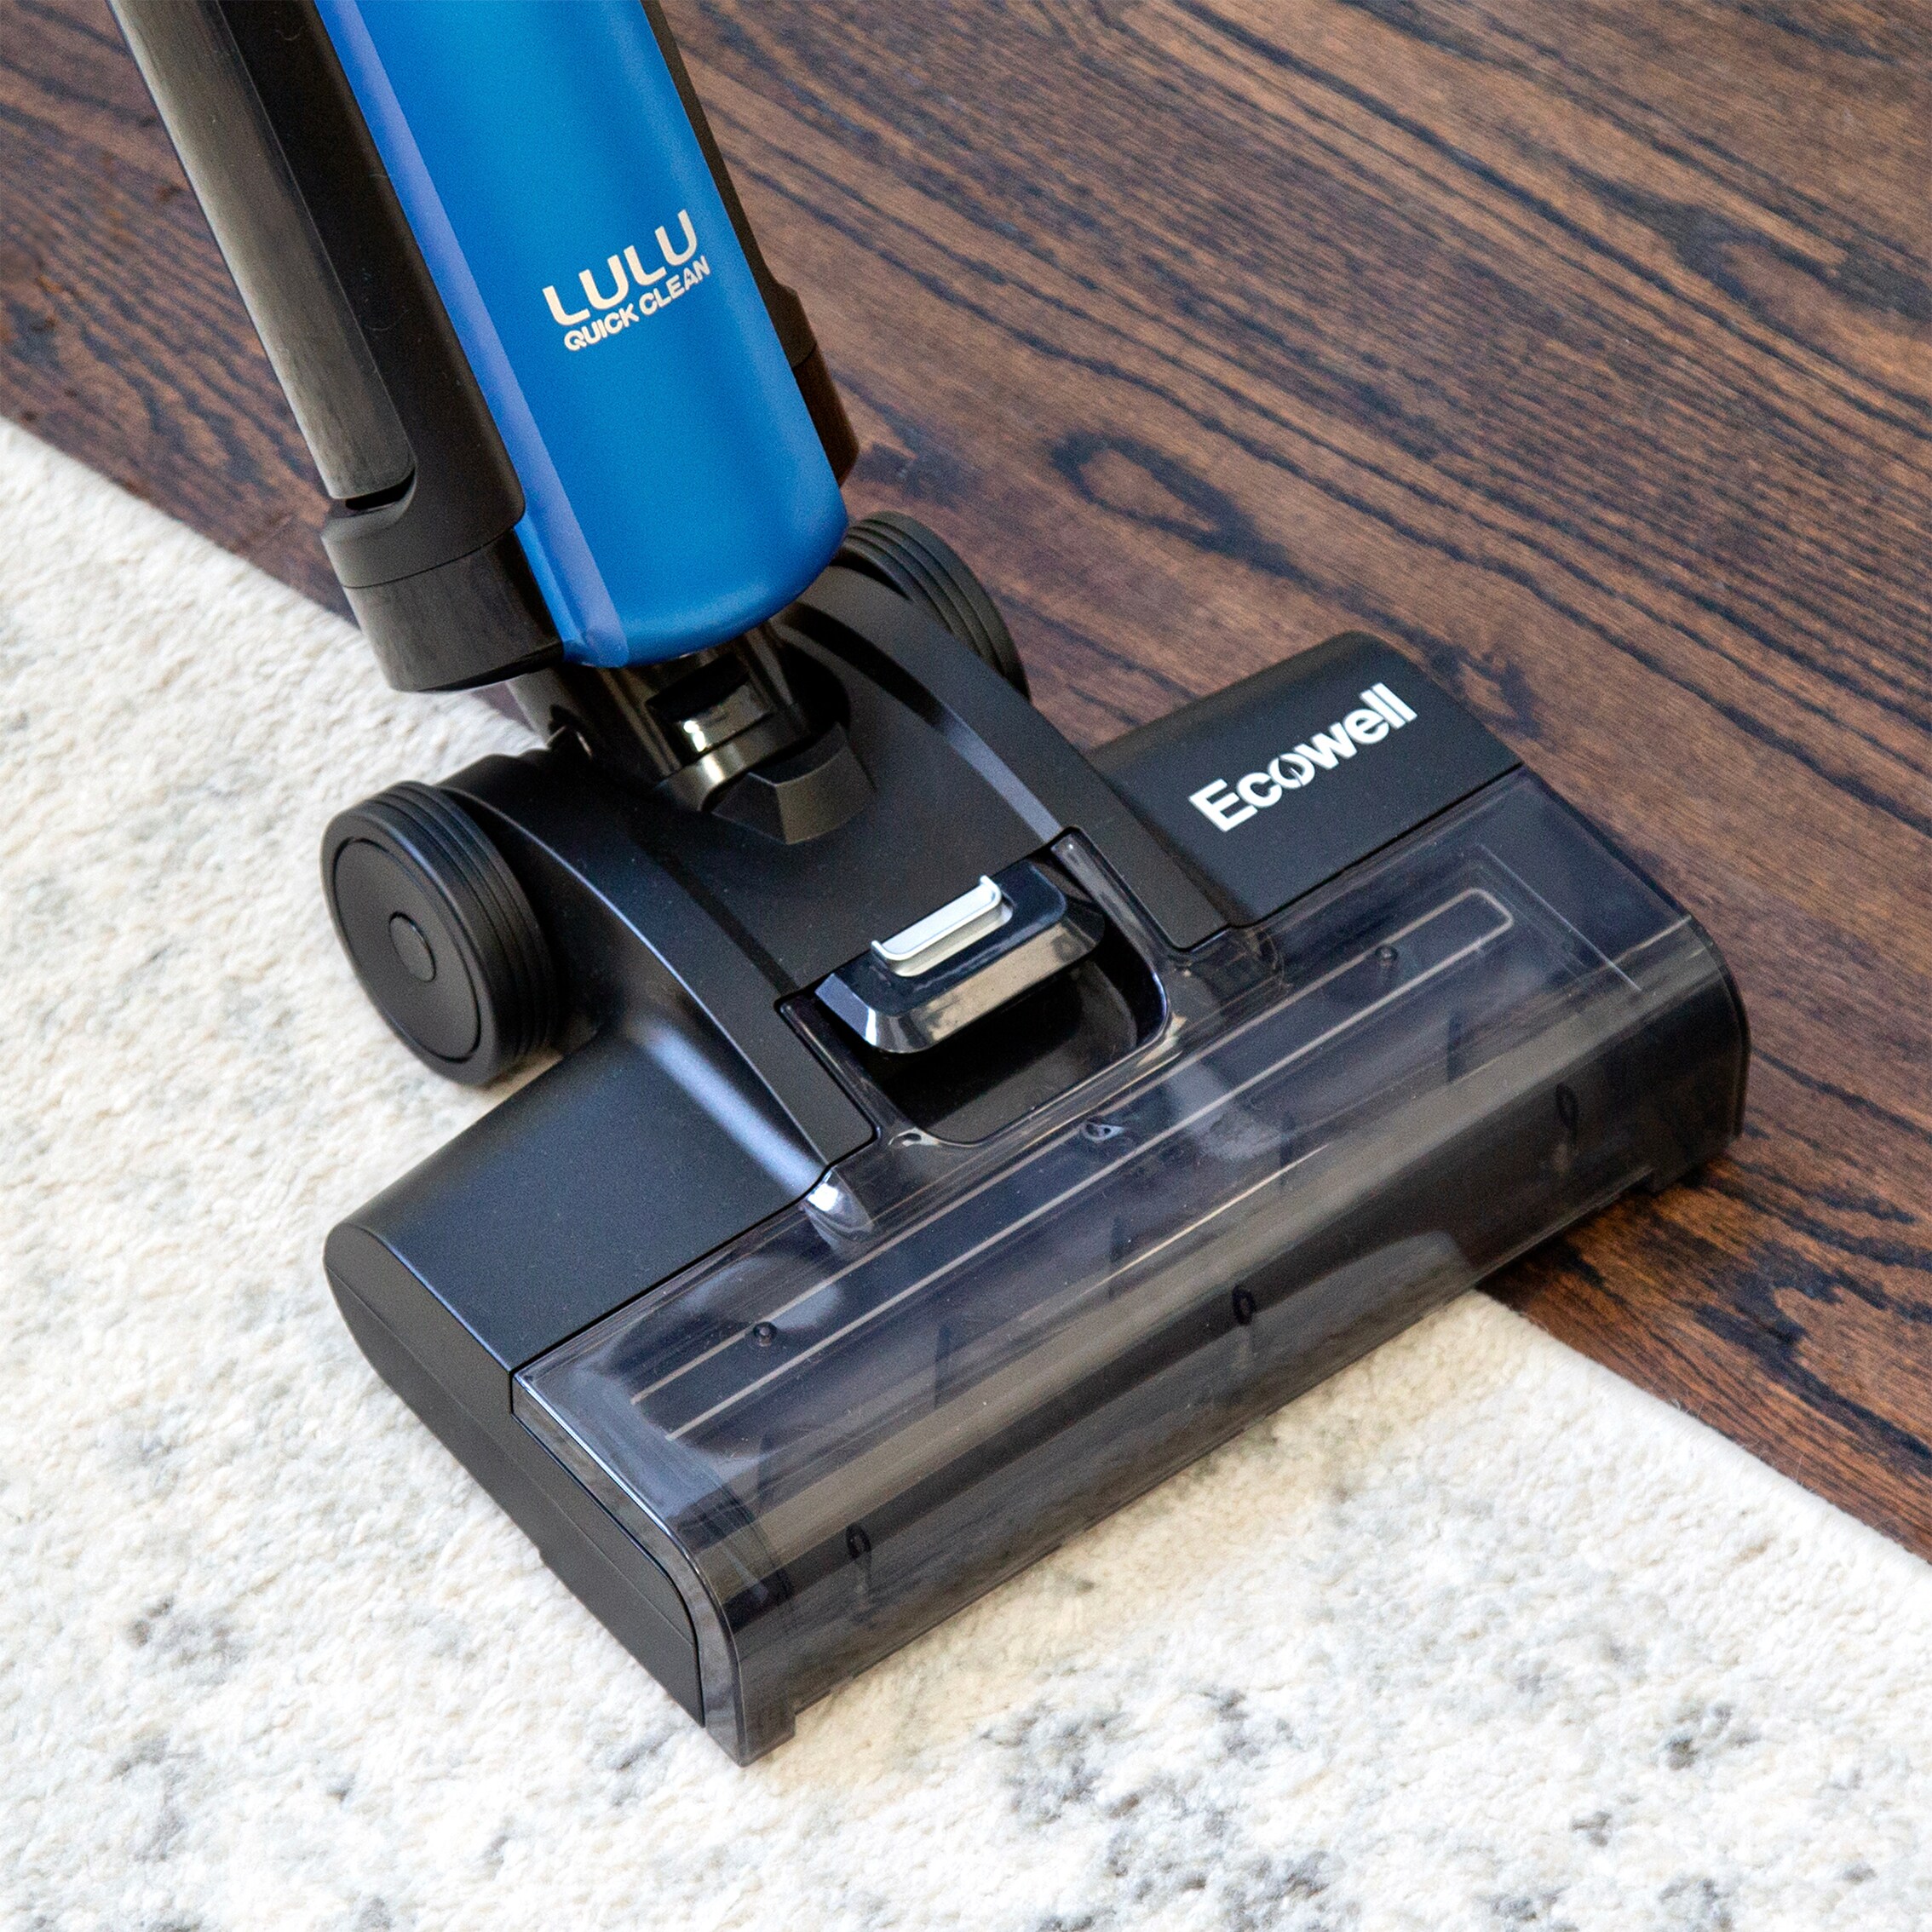 ECOWELL Portable Carpet Cleaner Machine, Spot Cleaner Lightweight Multifunctiona